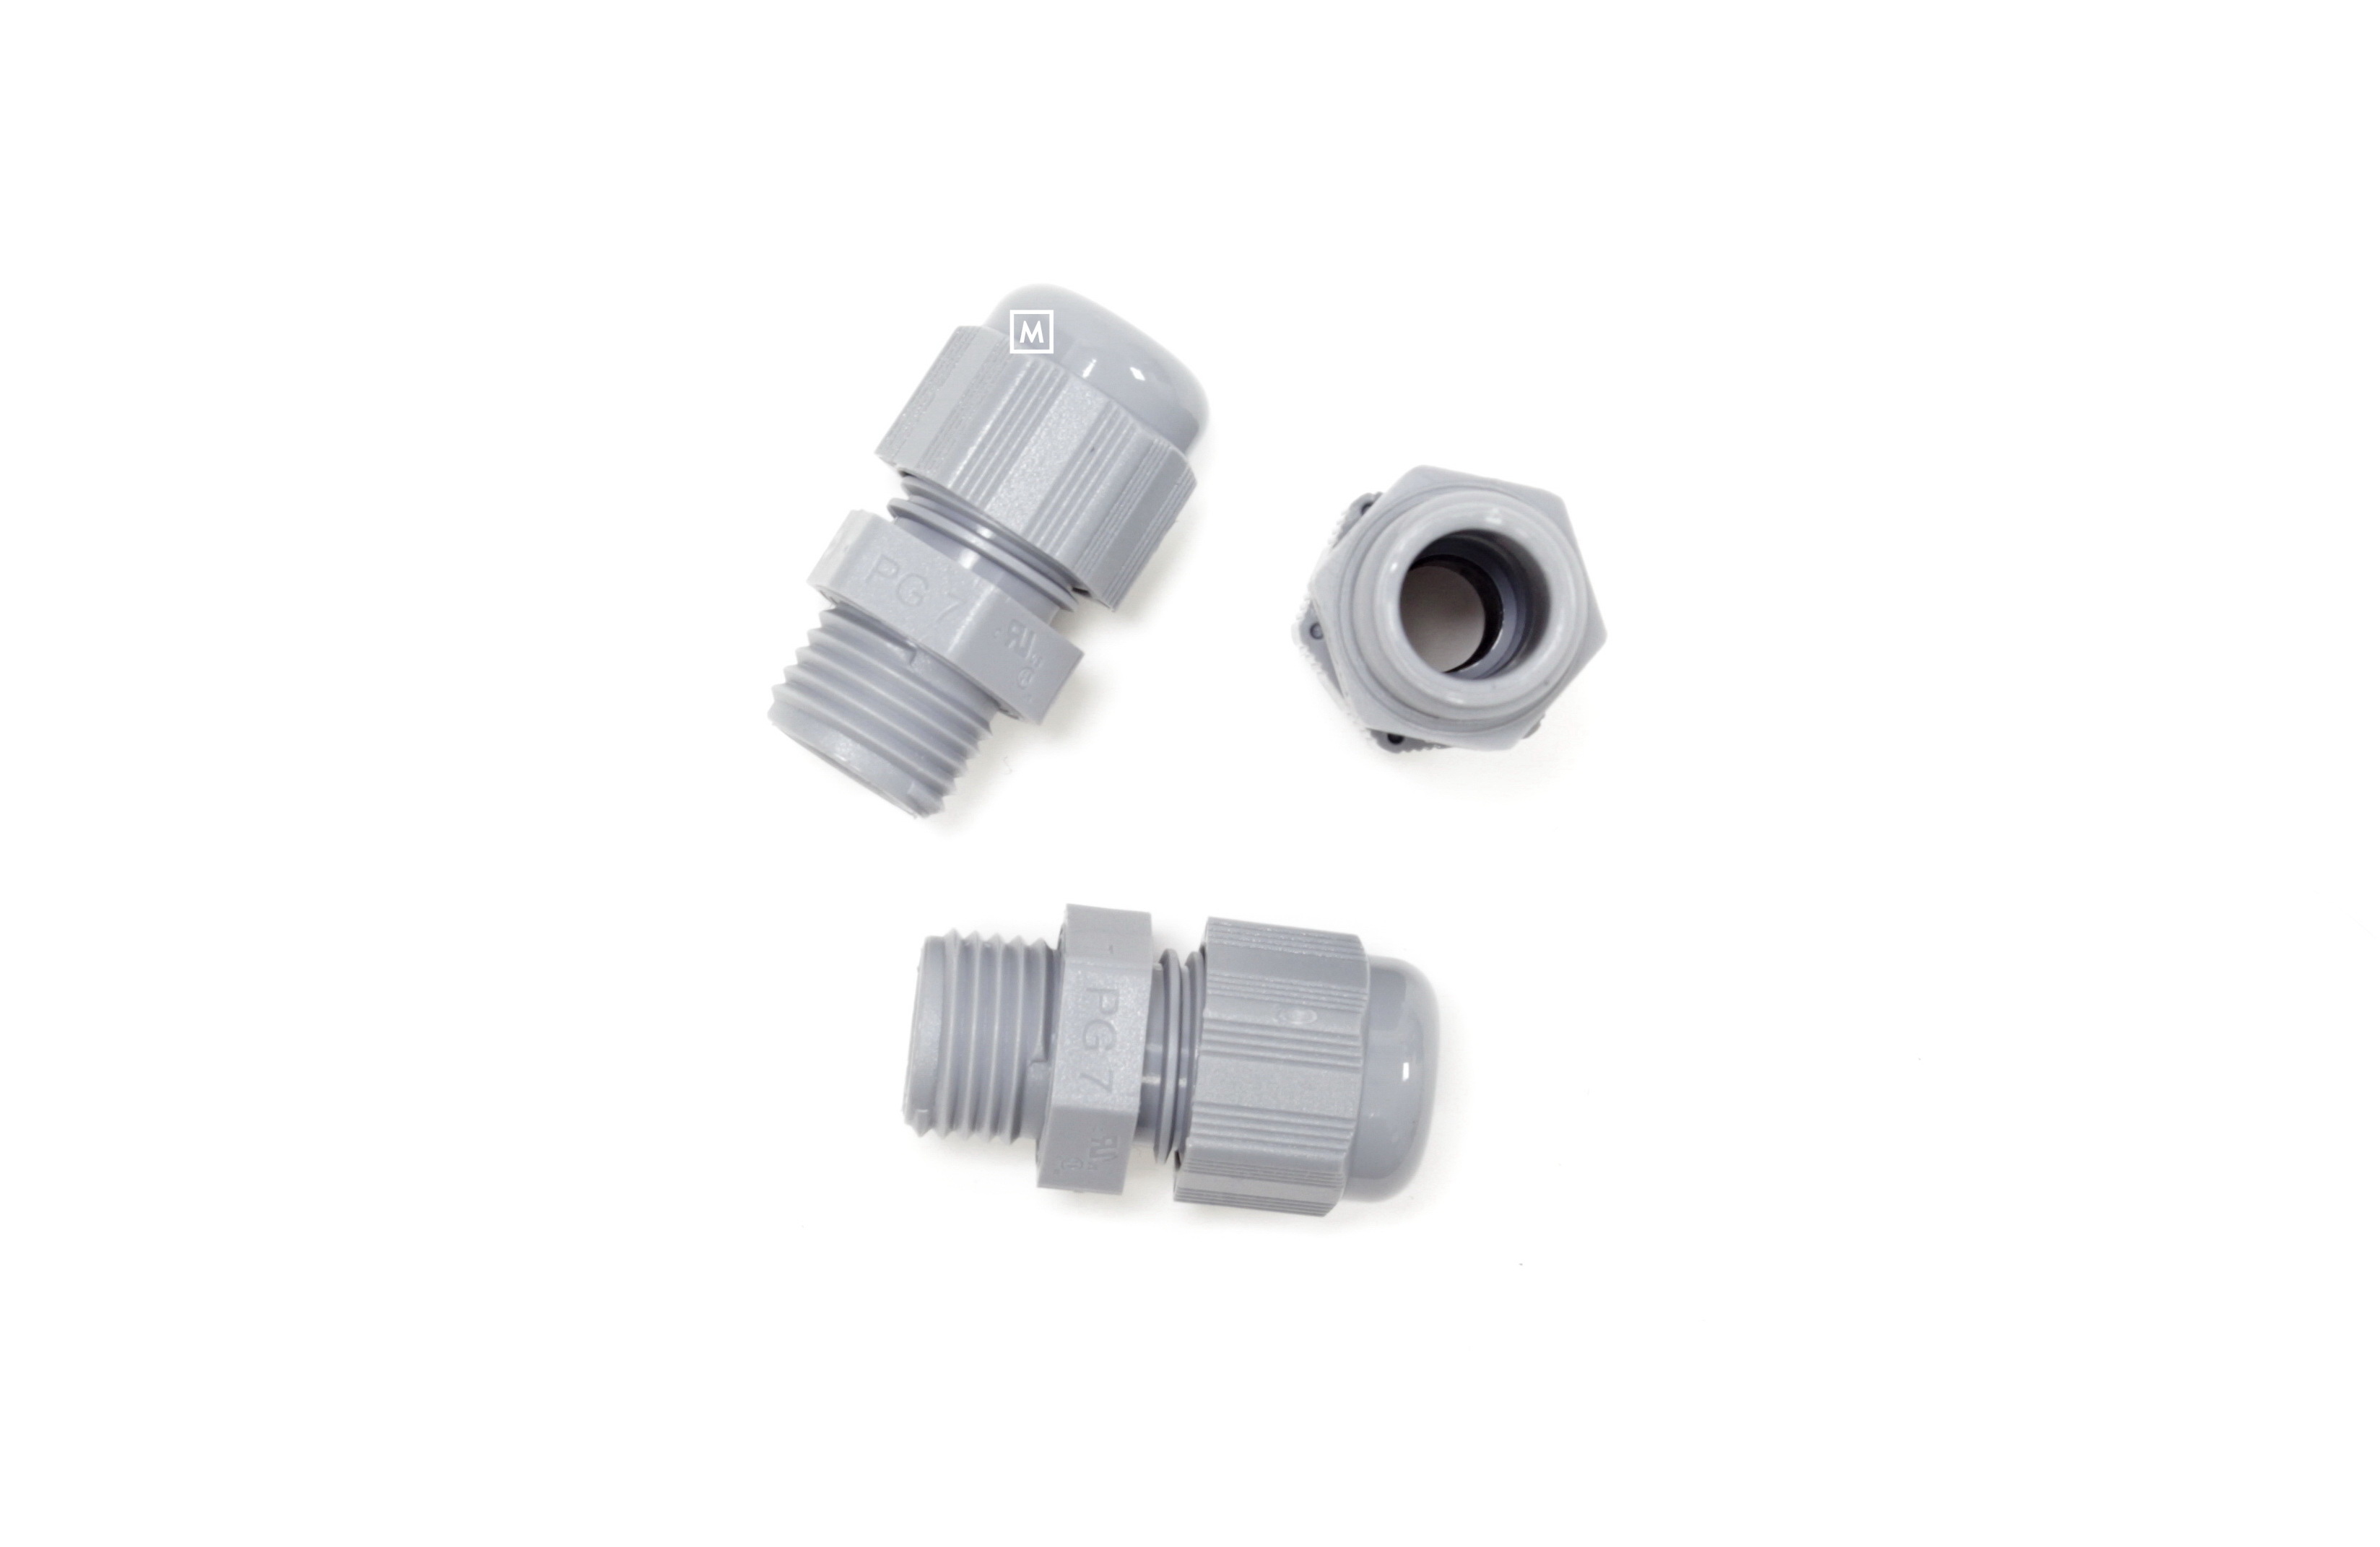 SET OF 3 CABLE GLANDS (MRD-12-00585-69)